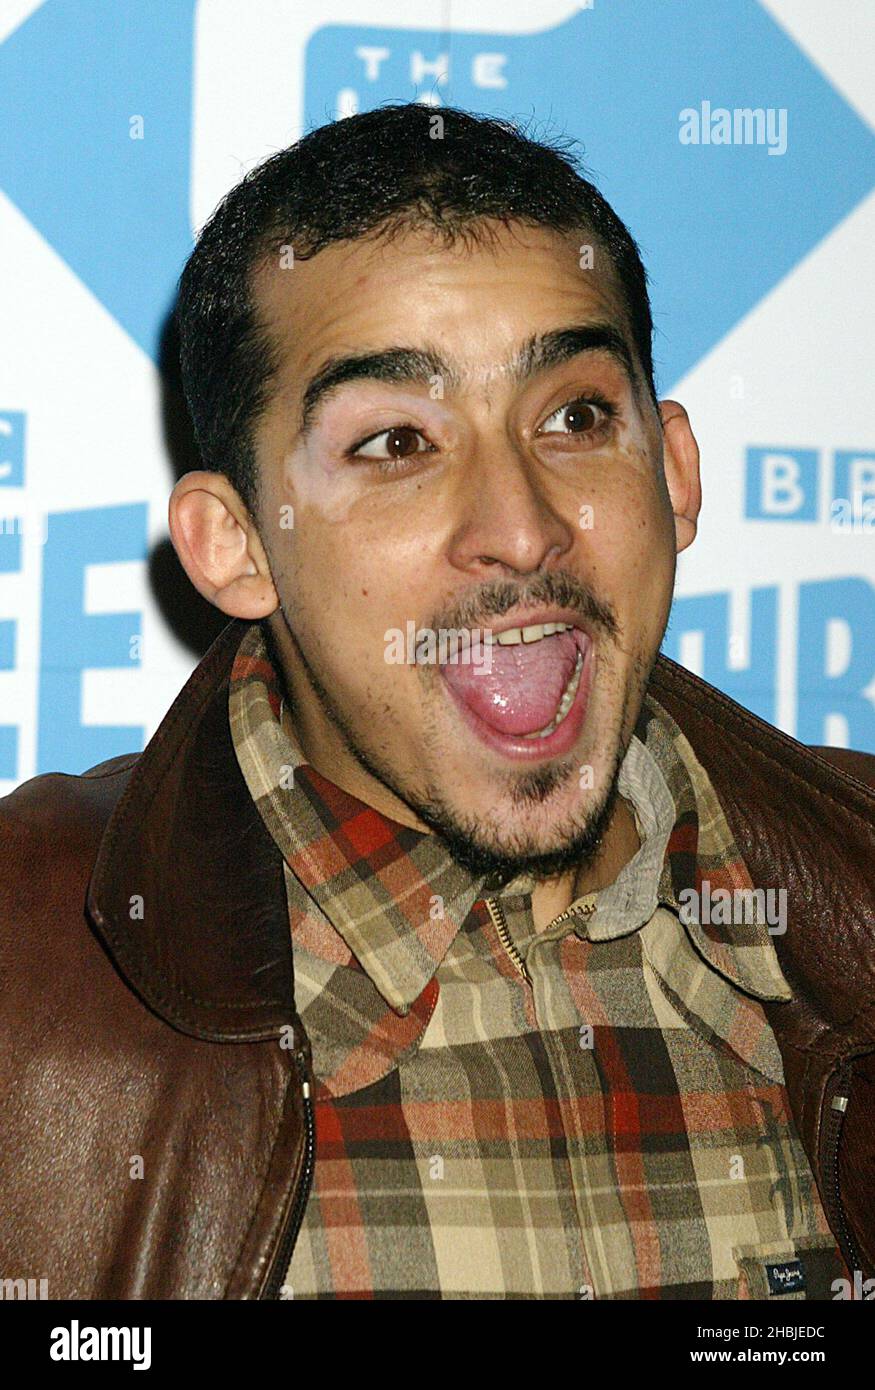 Nabil Elouahabi arrives at 'The Big C - Fundraising Concert' at Alexandra Palace on October 30, 2004 in London. The concert - hosted by Lisa Snowdon and Reggie Yates - marks the end of the BBC's 'You, Me, & Cancer Awareness Month'. Stock Photo